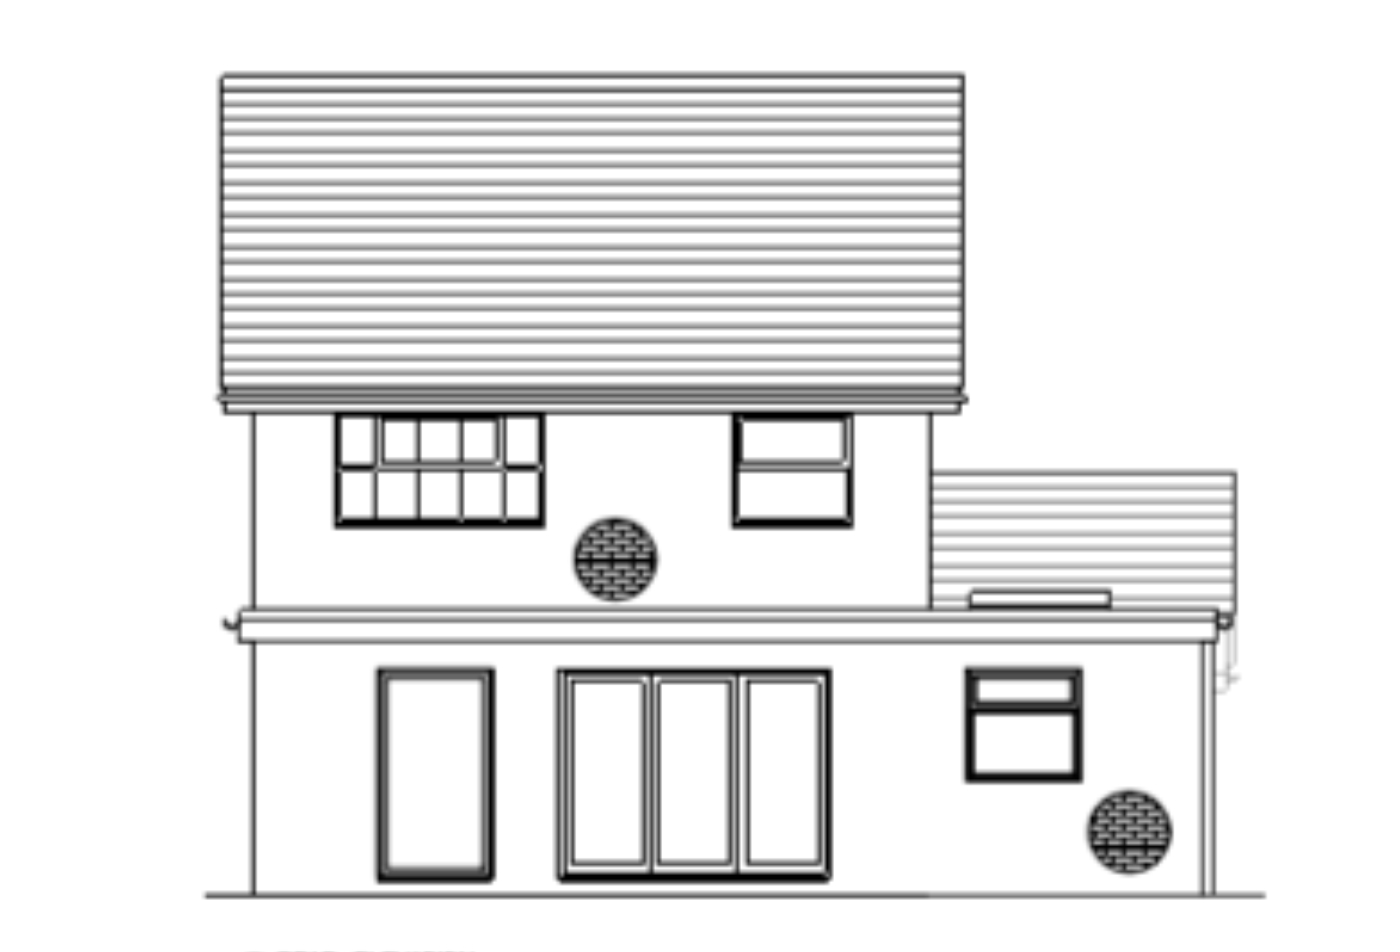 Drawings Prior To Extension